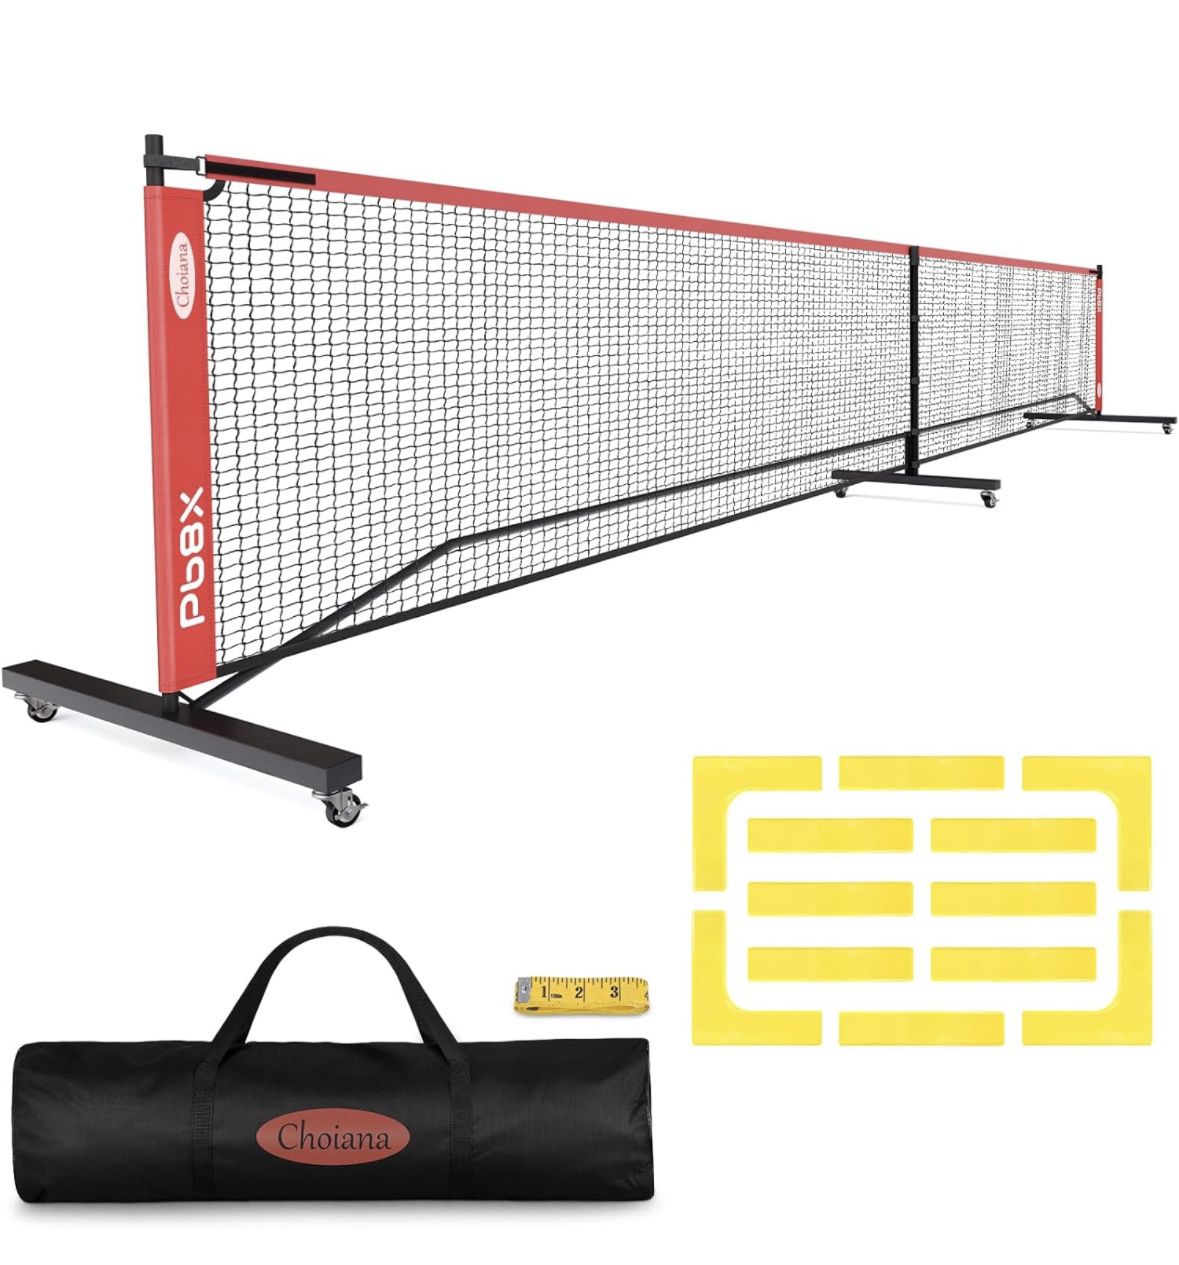 Pickleball Net Portable Driveway Pickleball Nets Outdoor Regulation Size 22ft Pickle Ball Nets w/Court Lines, 6 Wheels, Durable Frame PE Knited Net fo